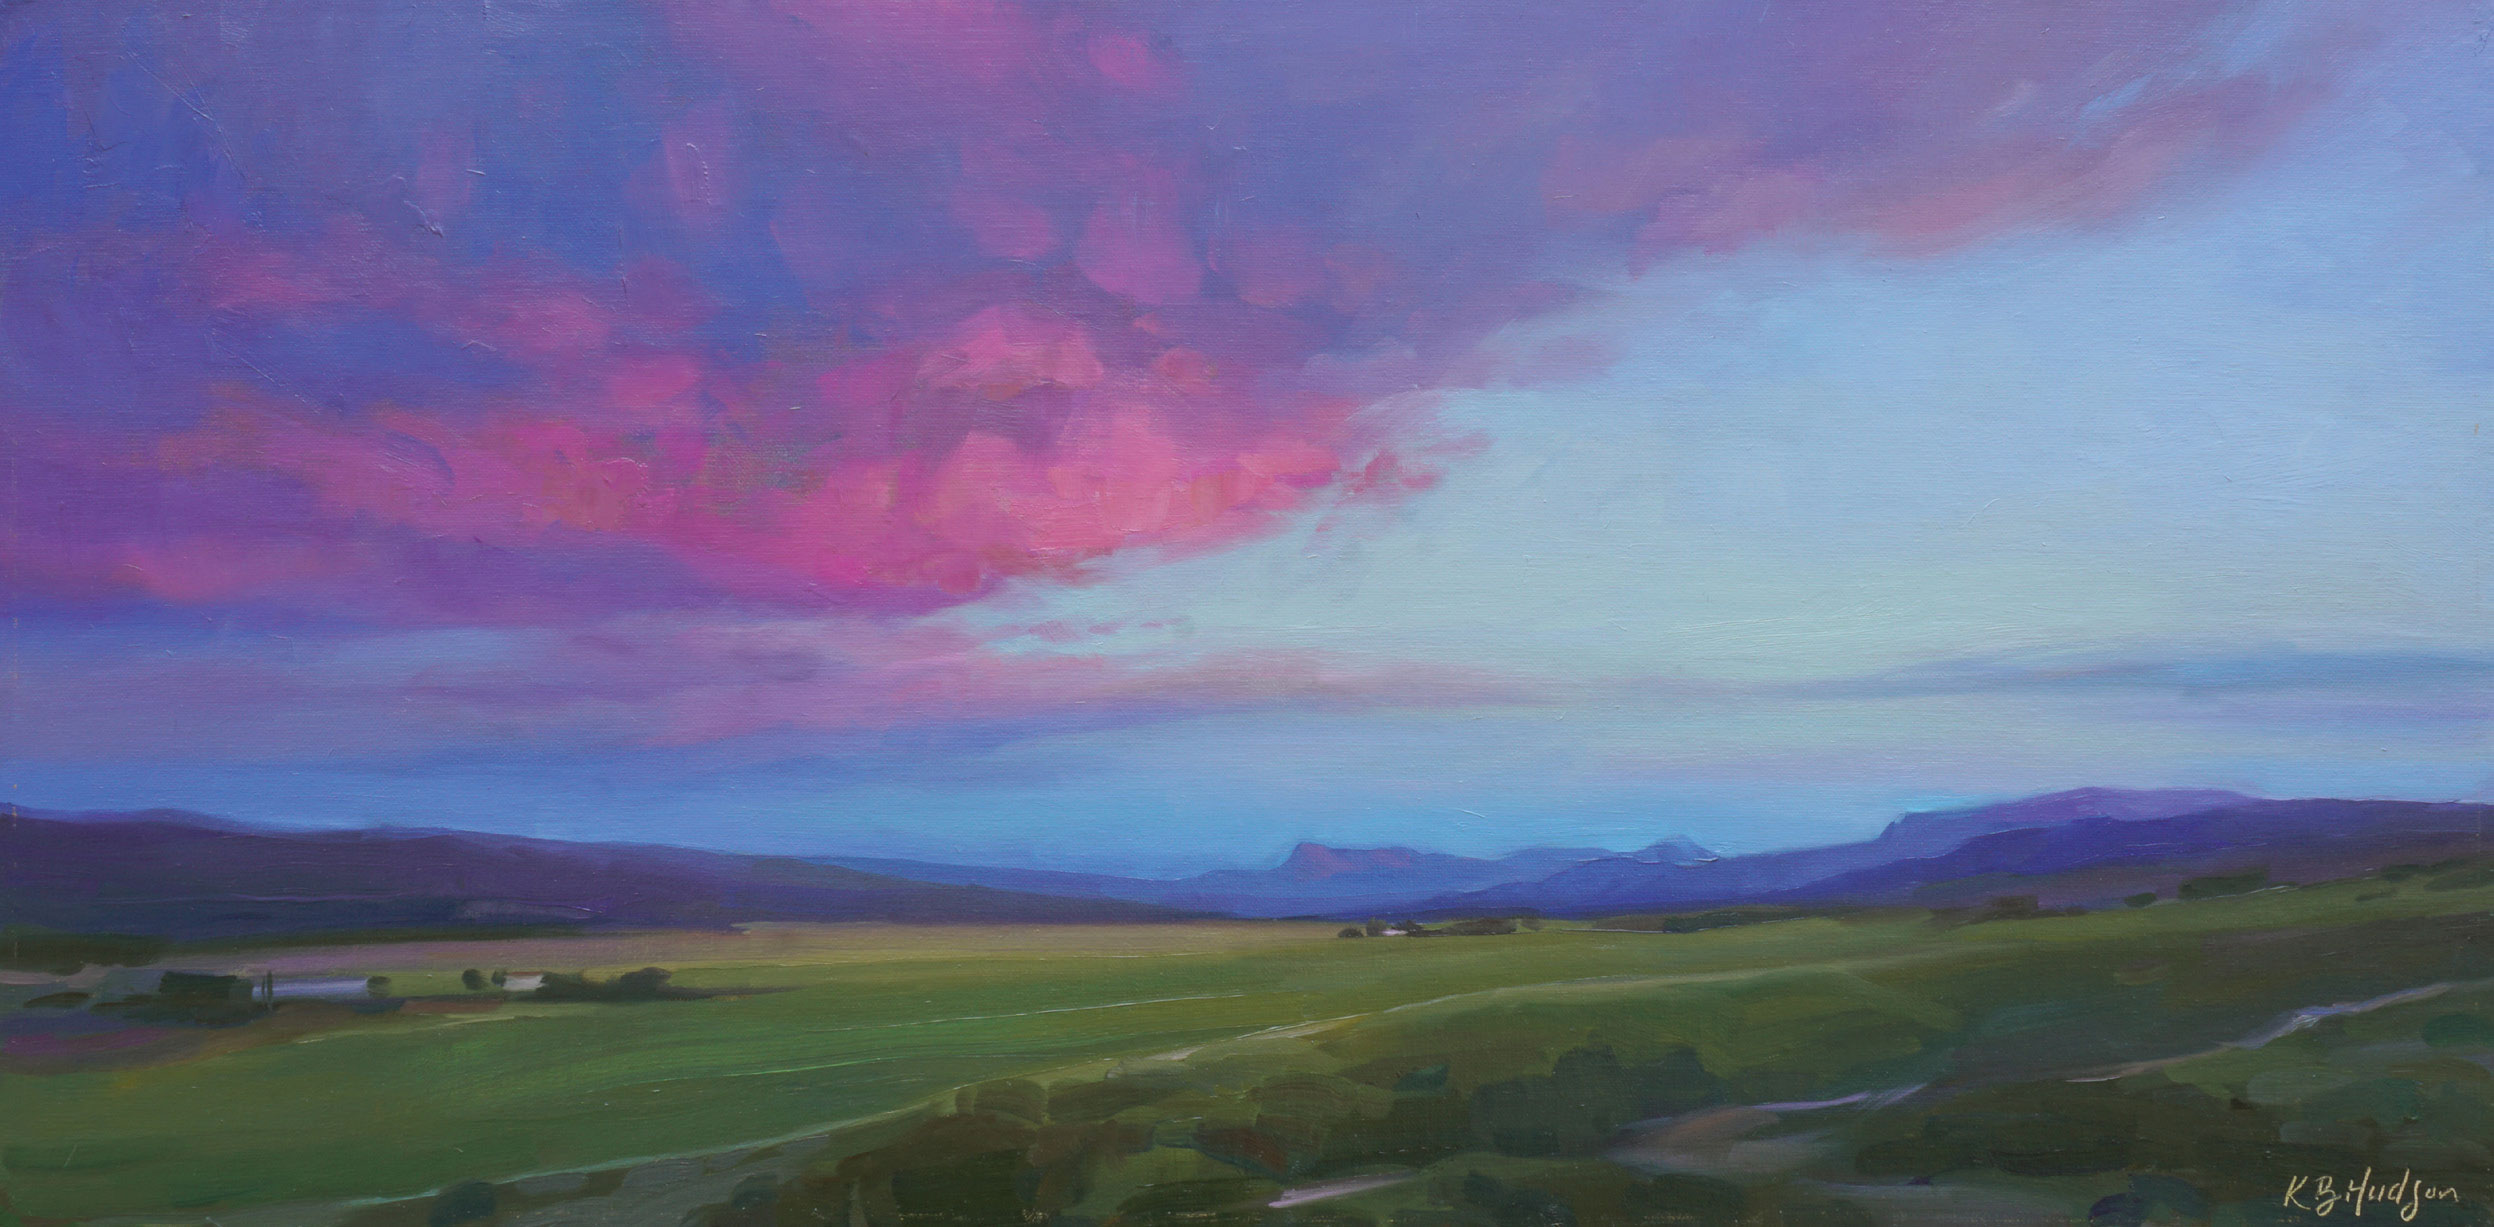 Kathleen Hudson, "Afterglow, East of Many Glacier," 2018, oil, 12 x 24 in., Collection the artist, Studio